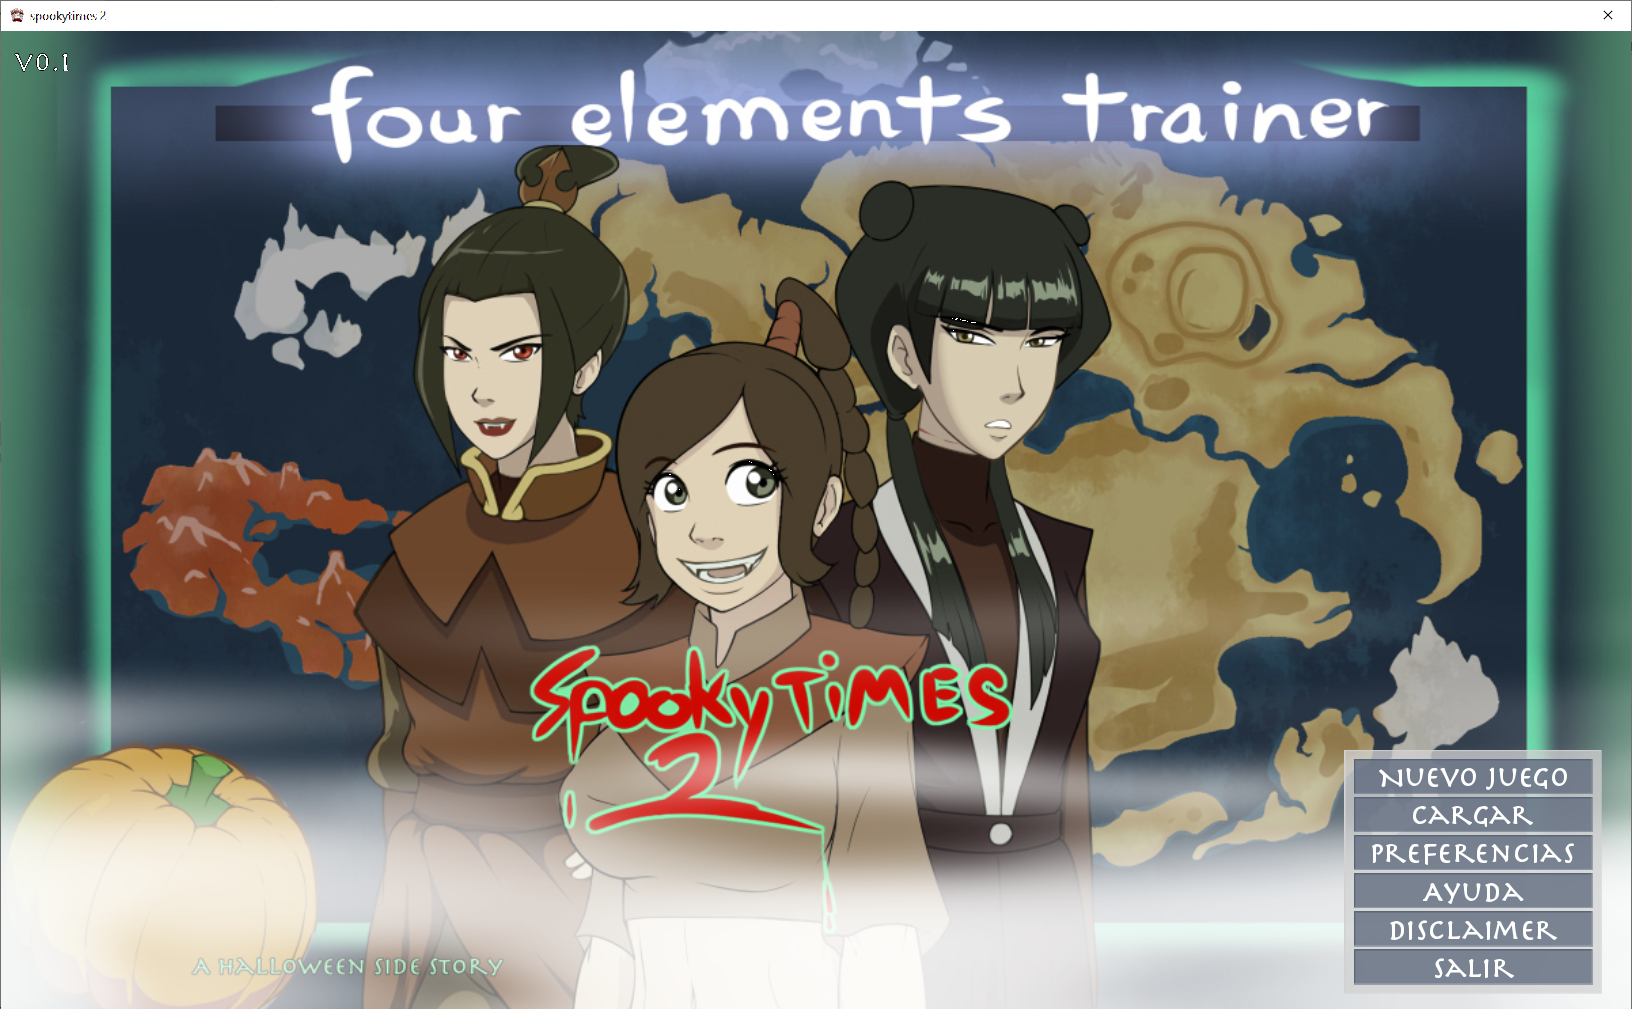 Four elements Trainer Spookytimes 2. Four elements Trainer spookytimes3. 4 Elements Trainer азула. Spooky times 2 - a four elements Side story, Part 2.